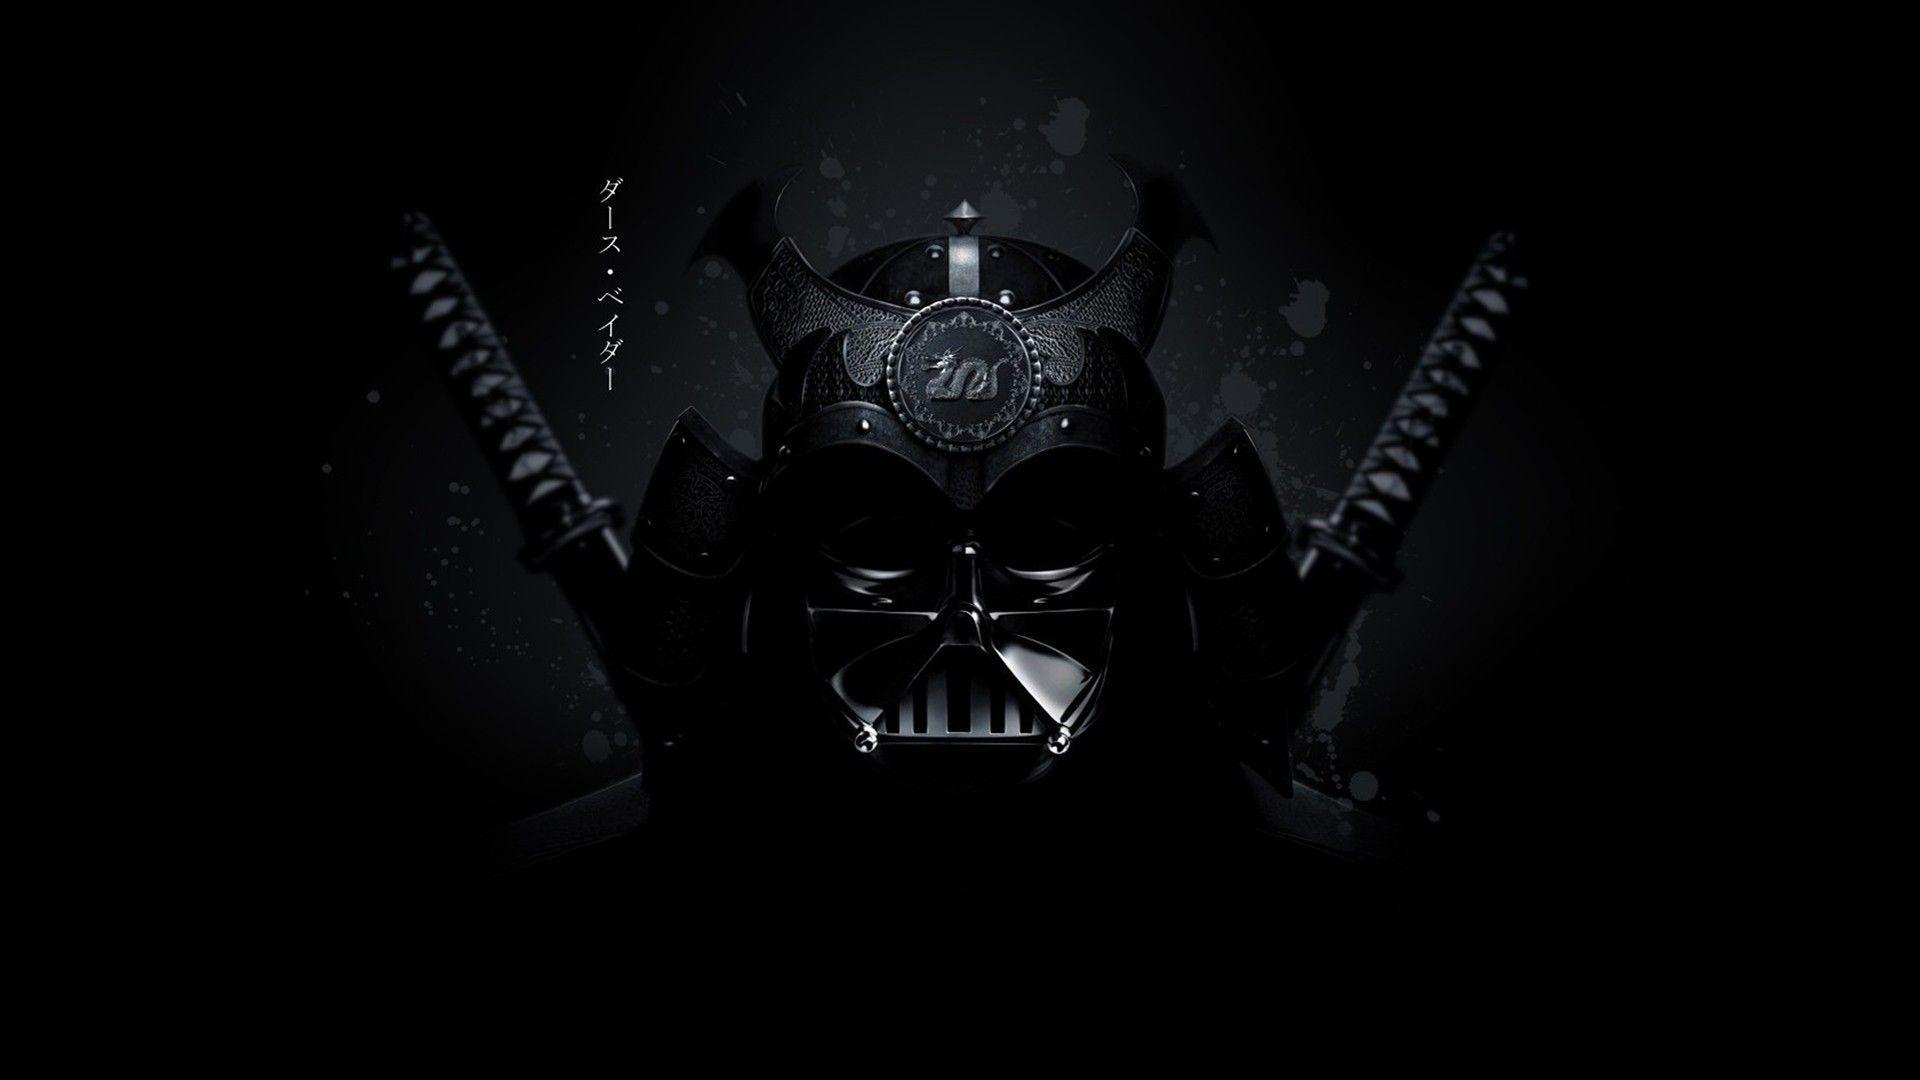 Largest Collection of Star Wars Wallpaper For Free Download